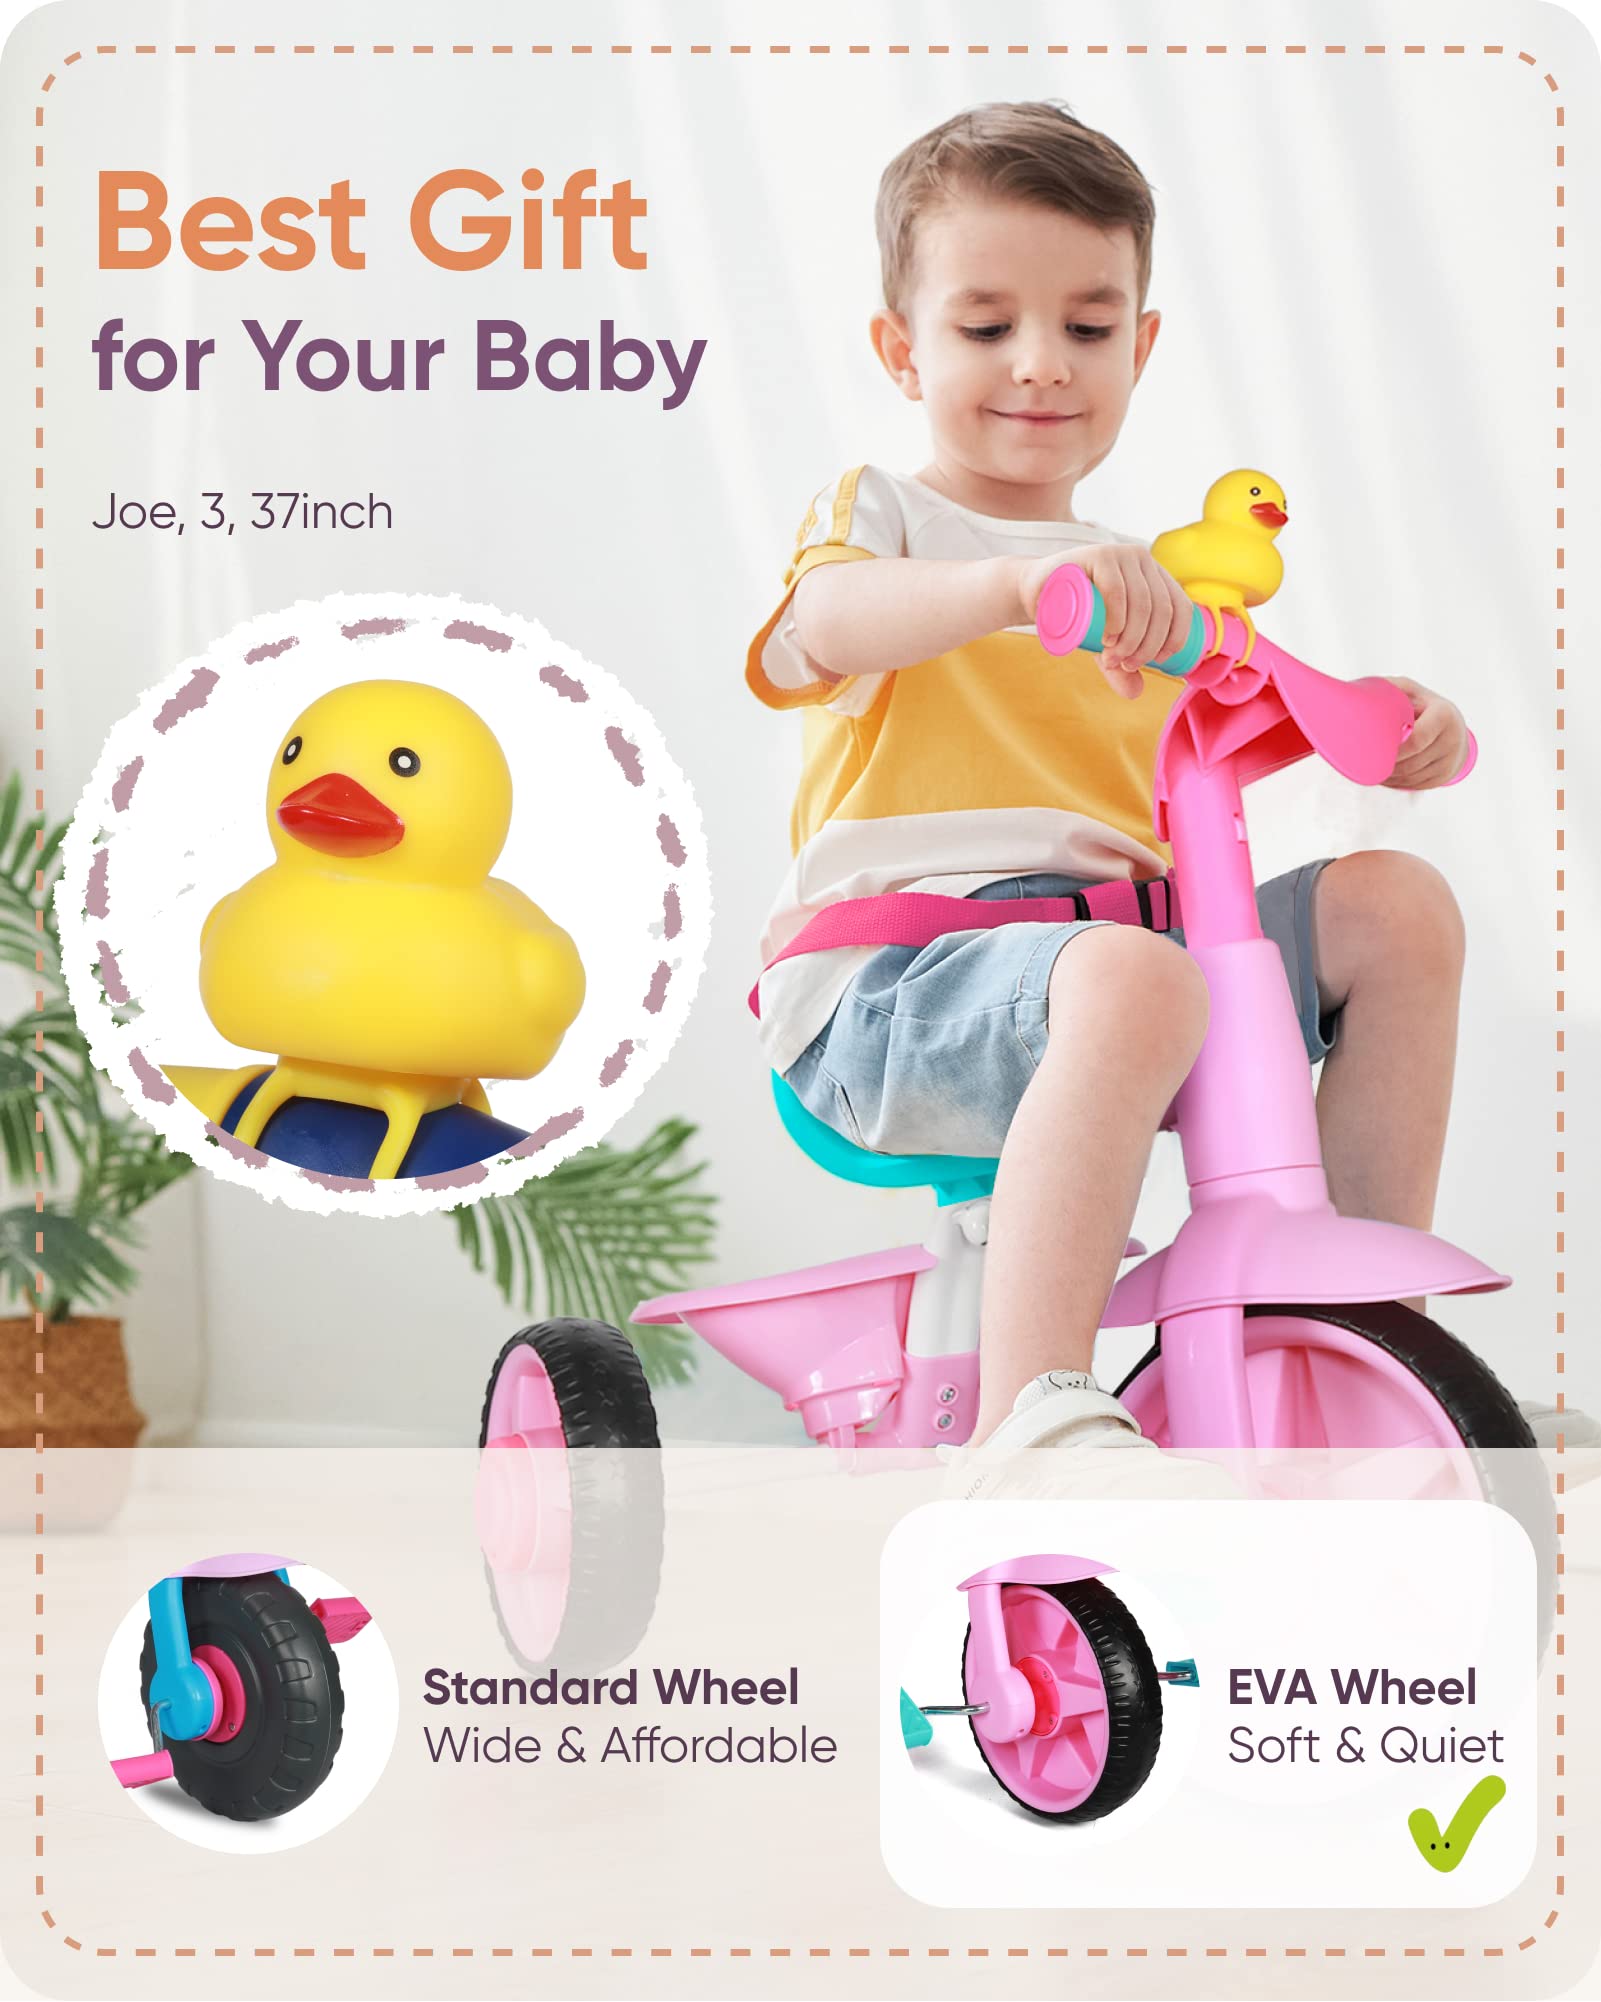 KRIDDO 2 in 1 Kids Tricycles Age 18 Month to 3 Years, Gift Toddler Trikes for Toddlers with Push Handle and Duck Bell, Pink